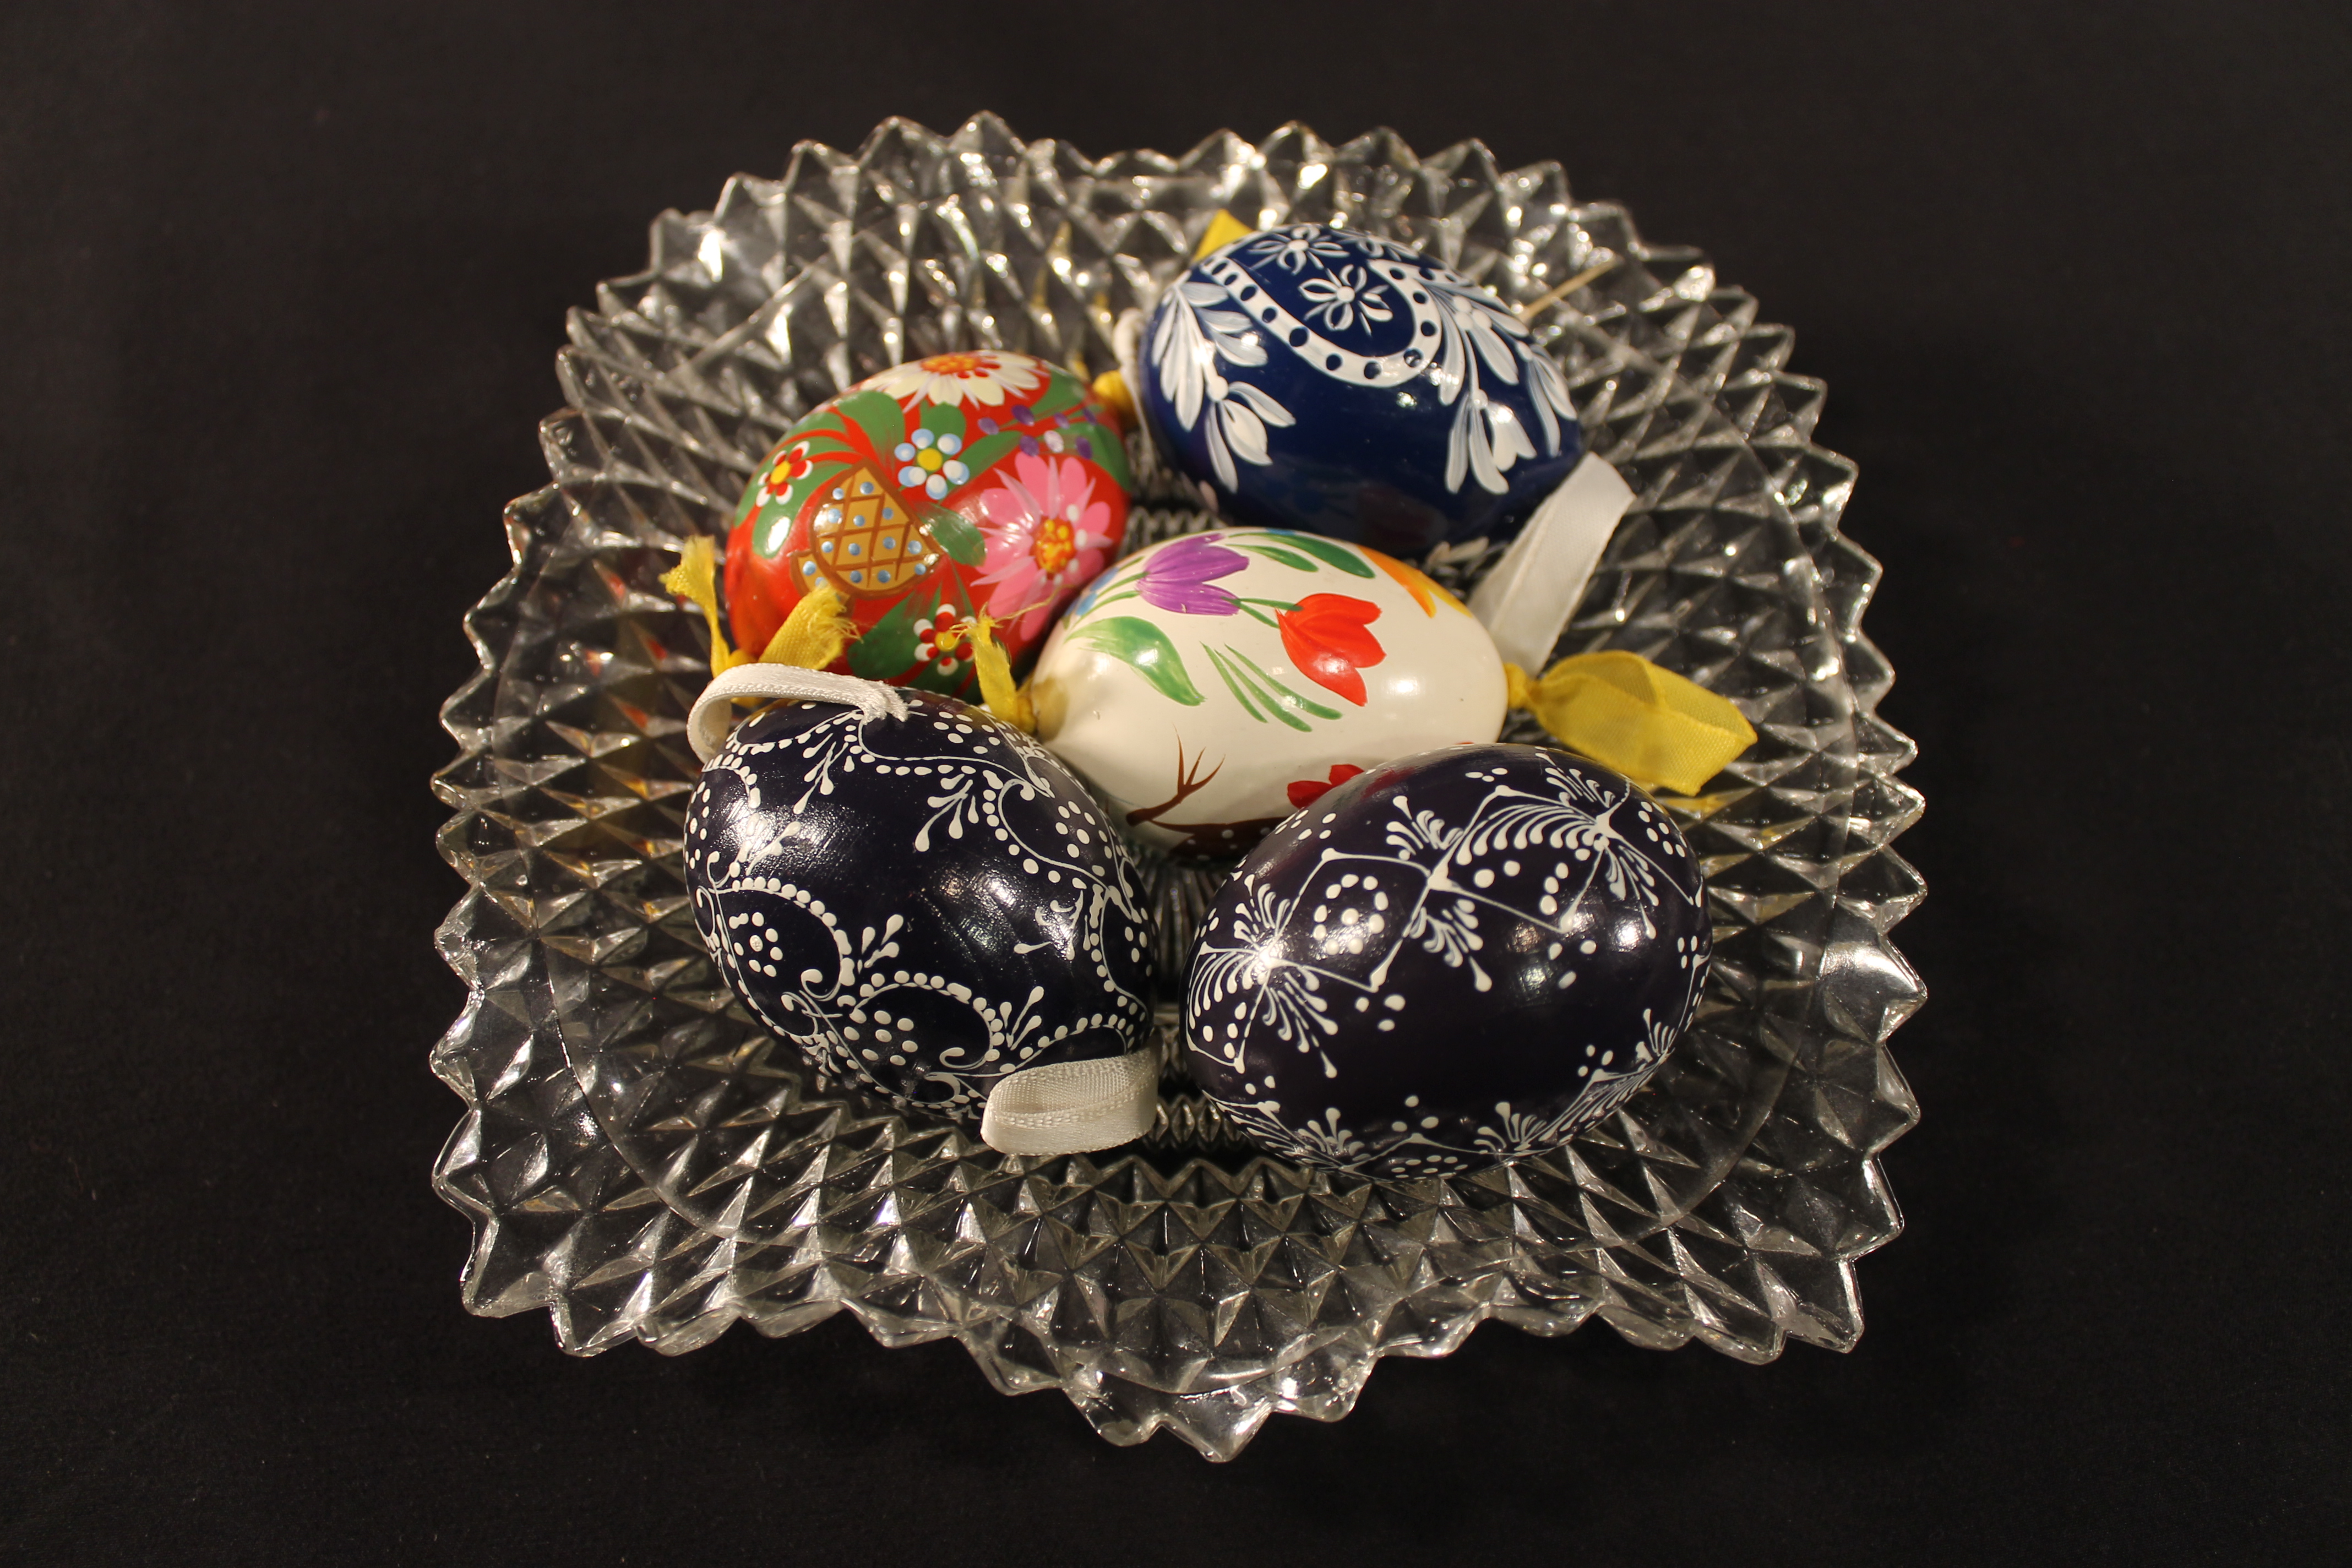 Five painted eggs. Three of them are blue and white with ornate designs with a white attached ribbon. One has multi-colored tulips and a yellow ribbon. The last one is red with various colors painted on it. 